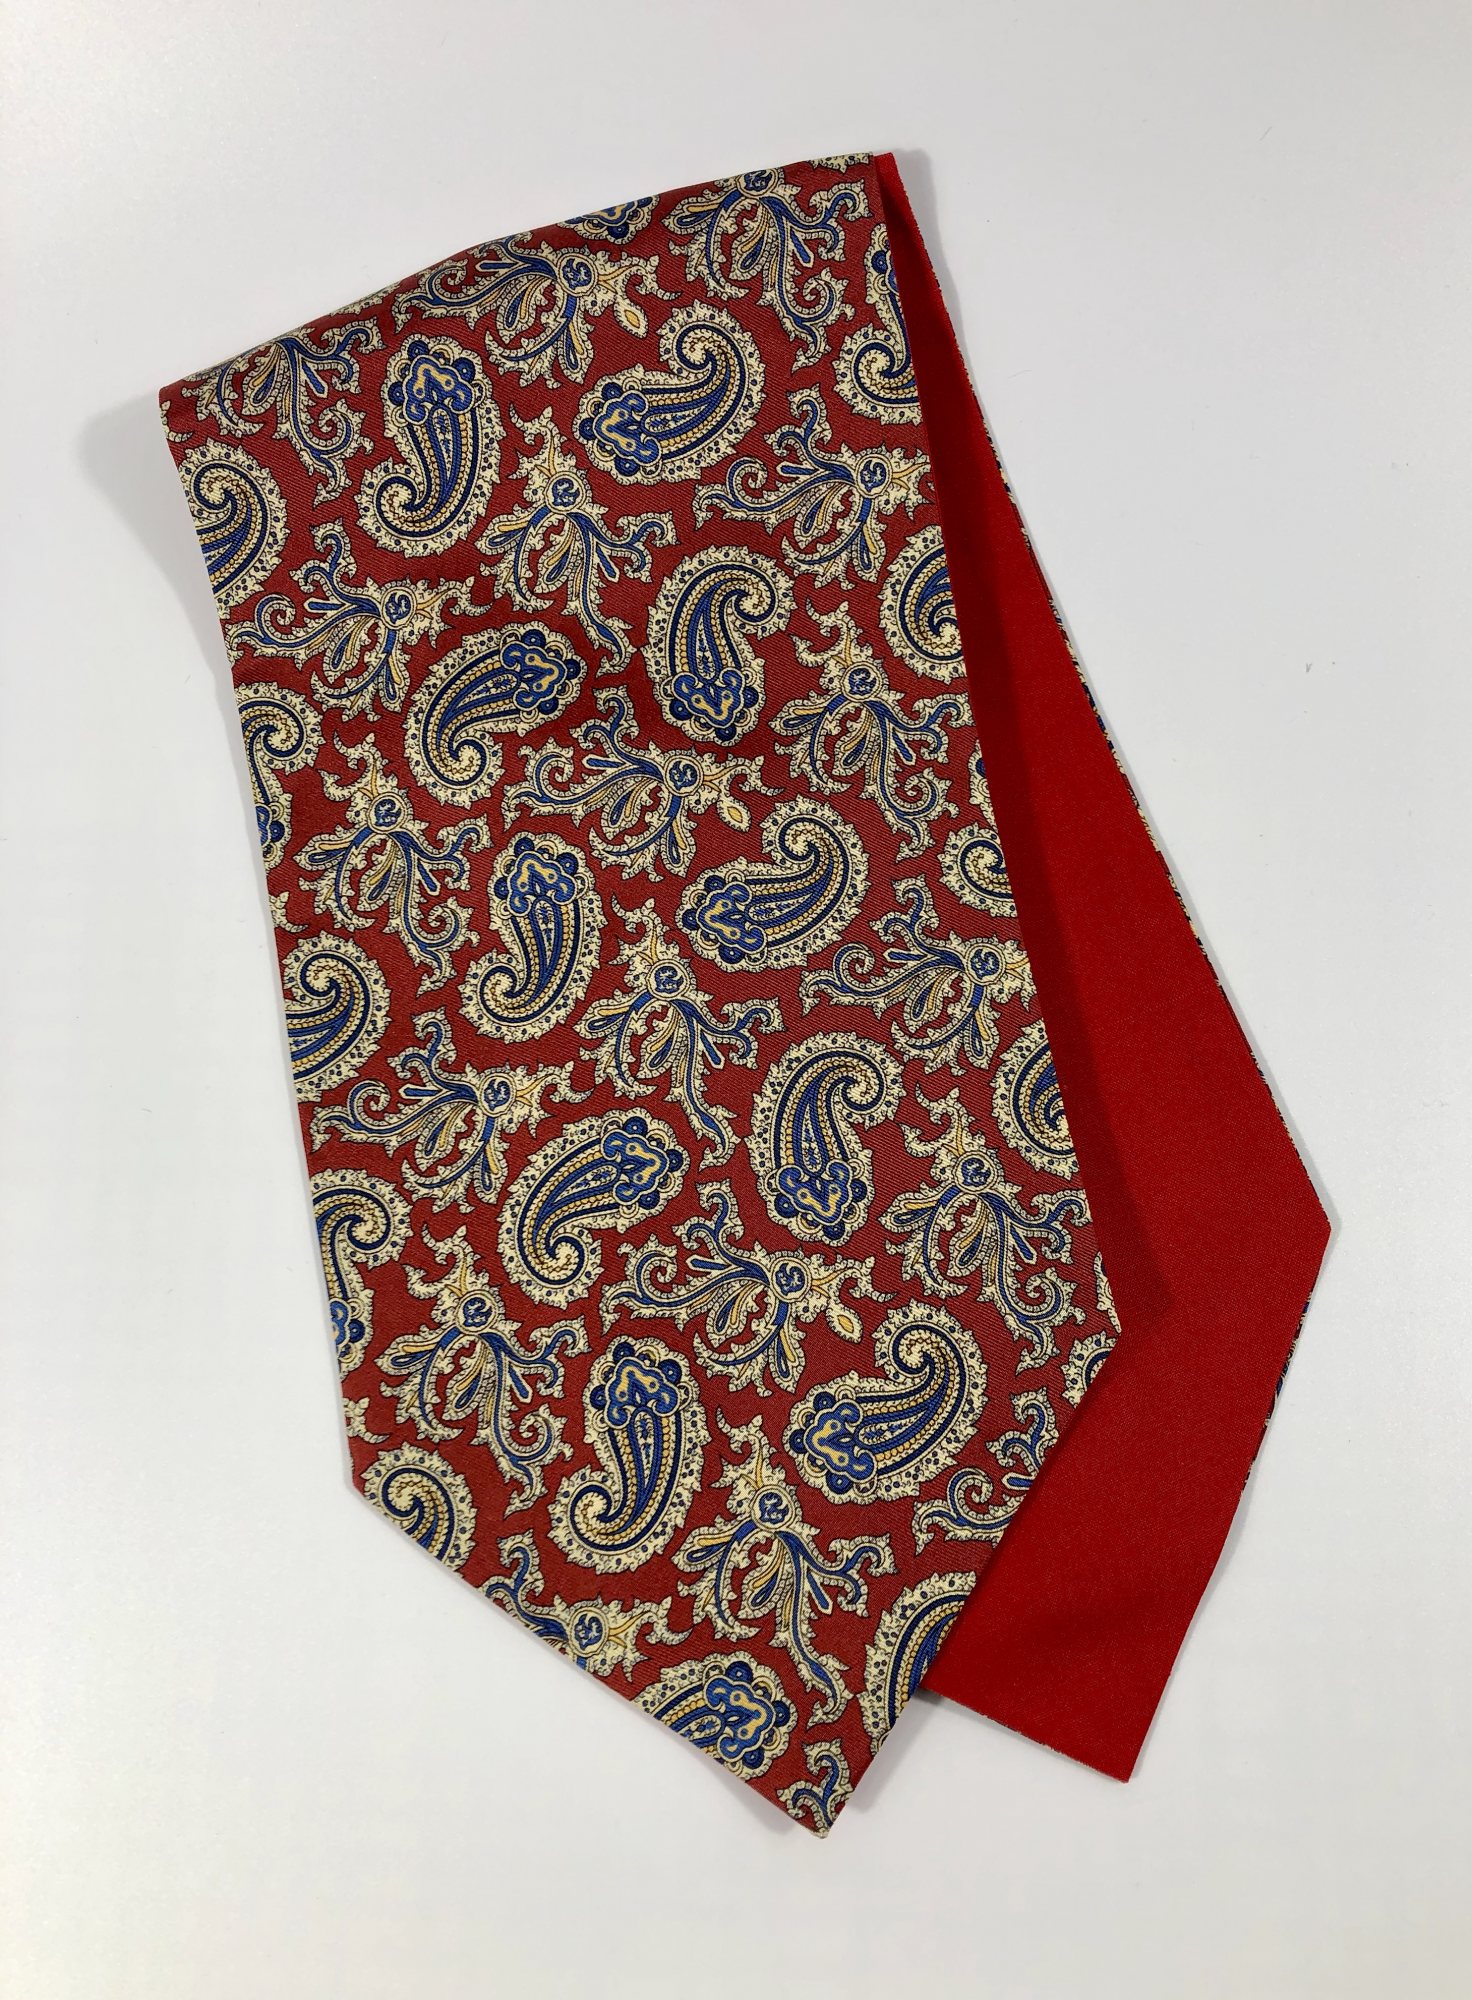 Bright red silk cravat with traditional Paisley pattern - Aidan Sweeney